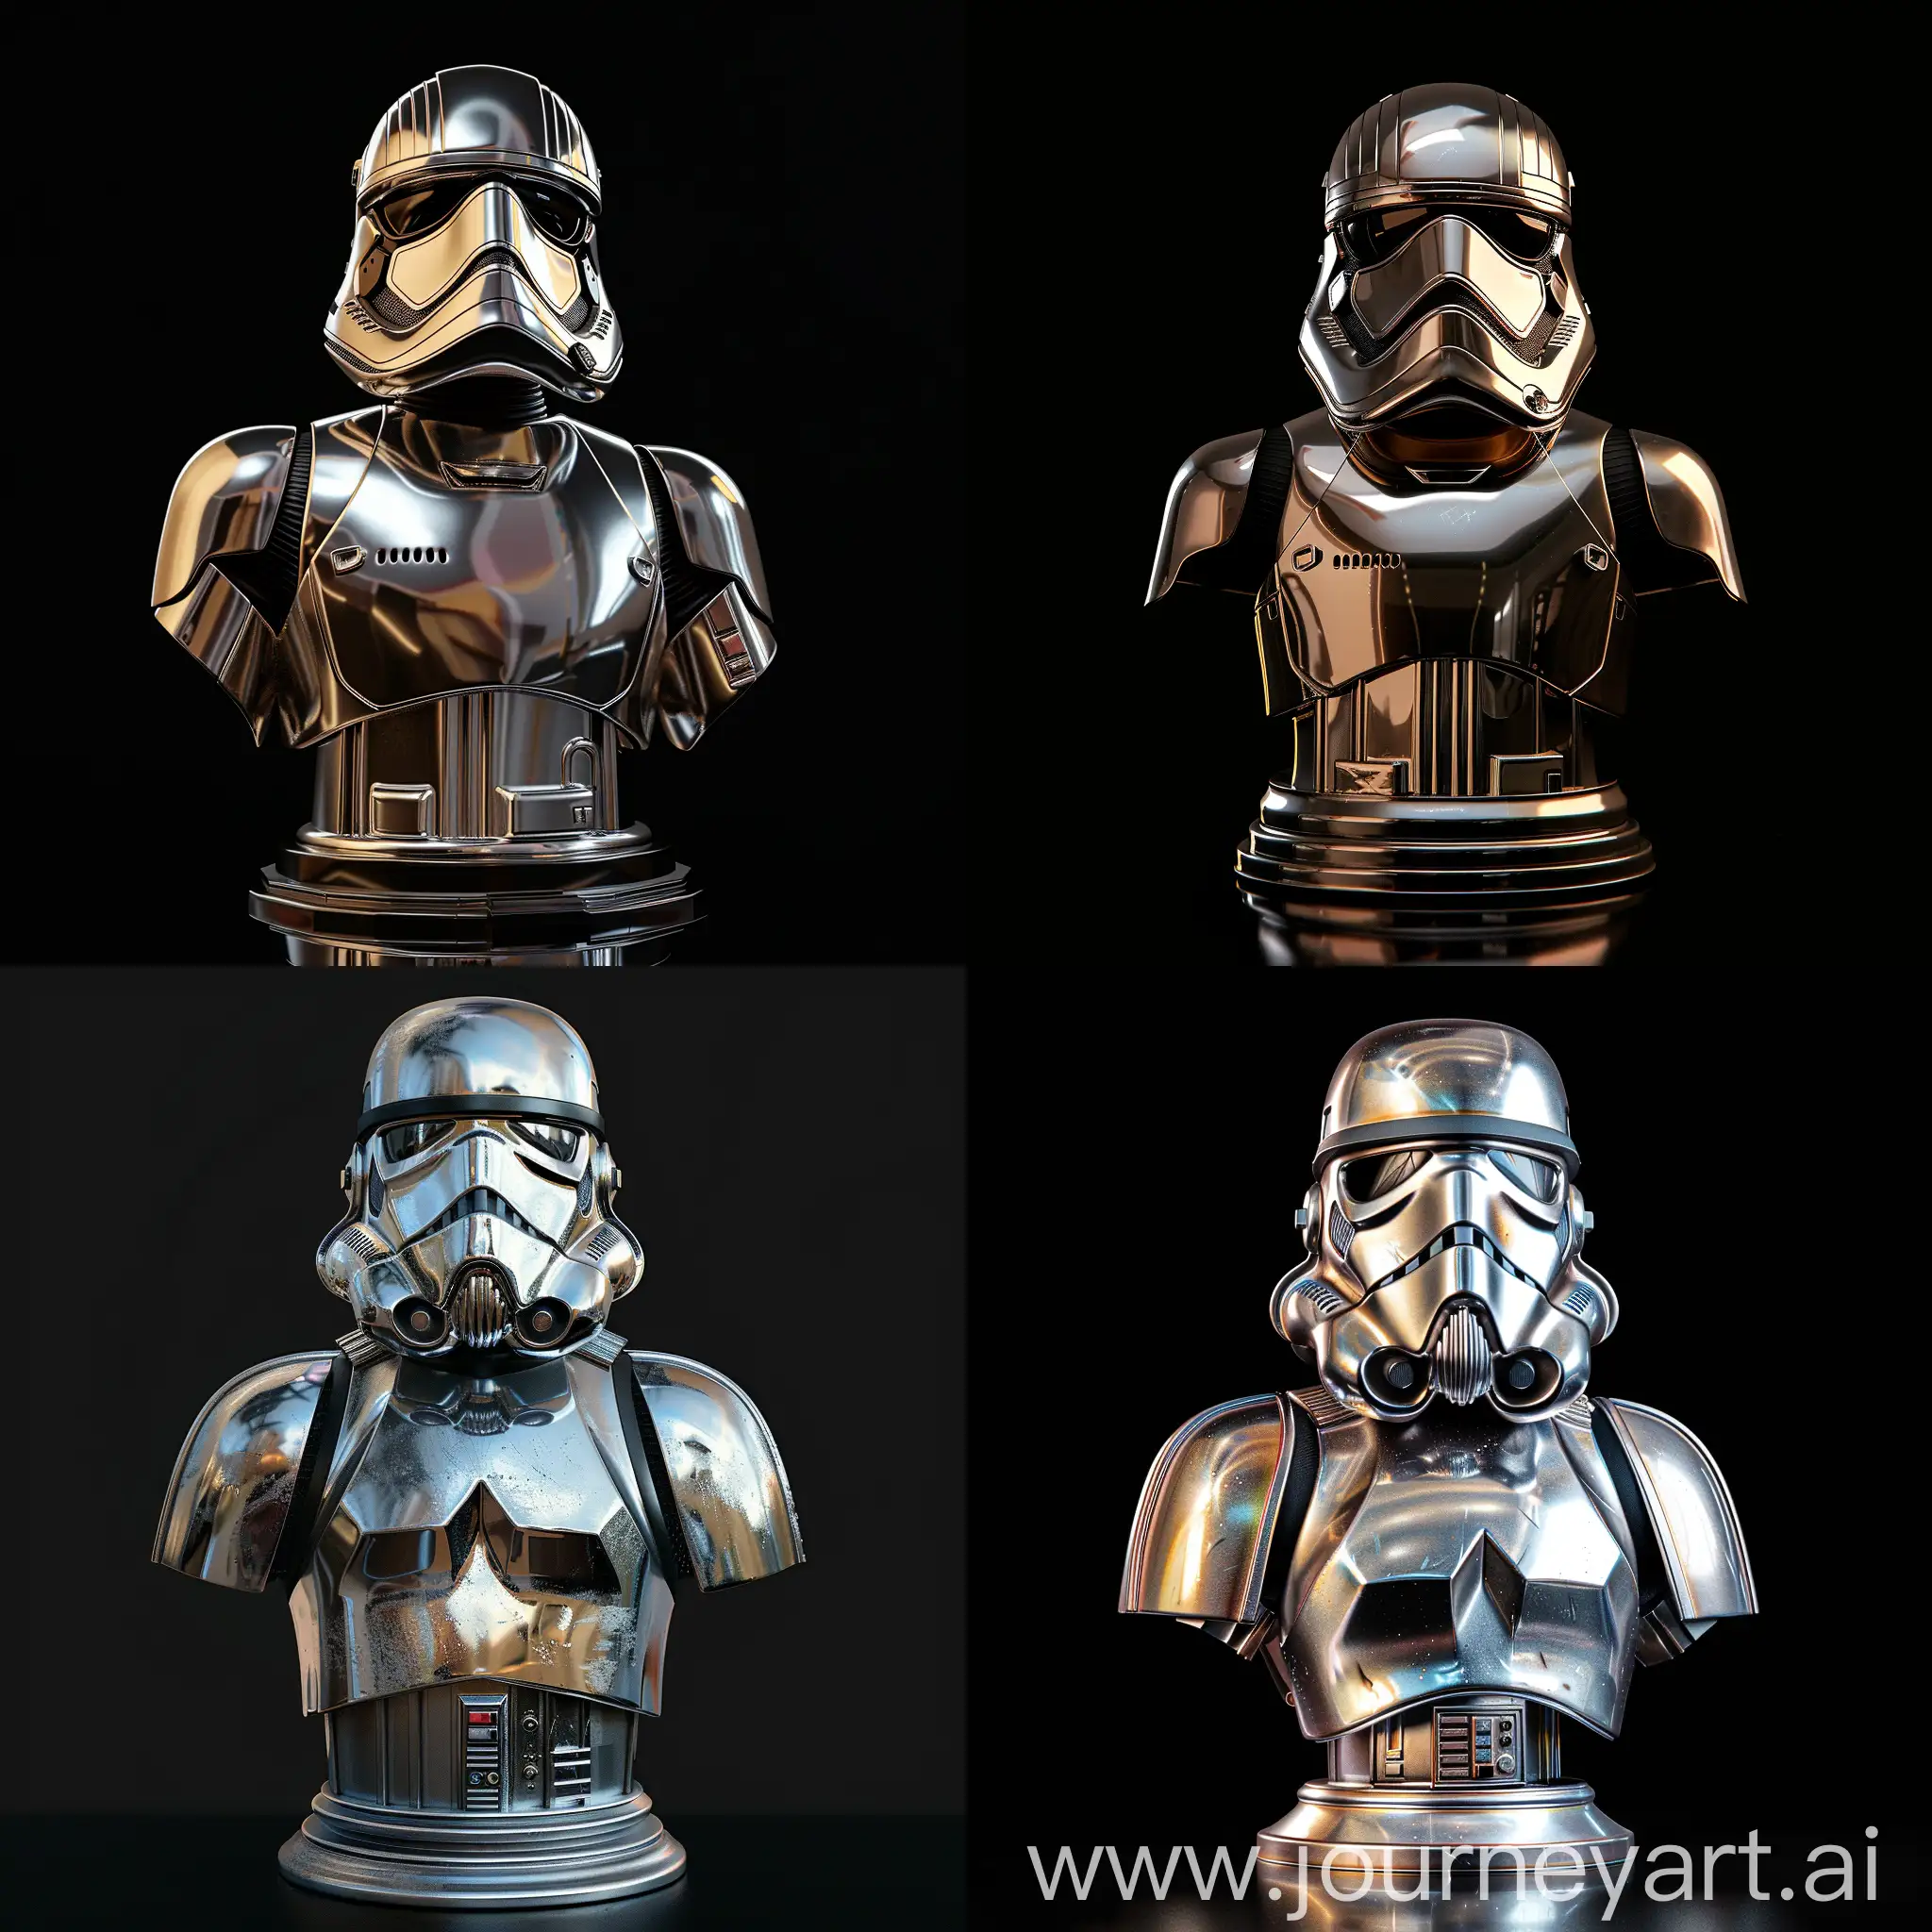 Photorealistic-3D-Storm-Trooper-Bust-on-Black-Background